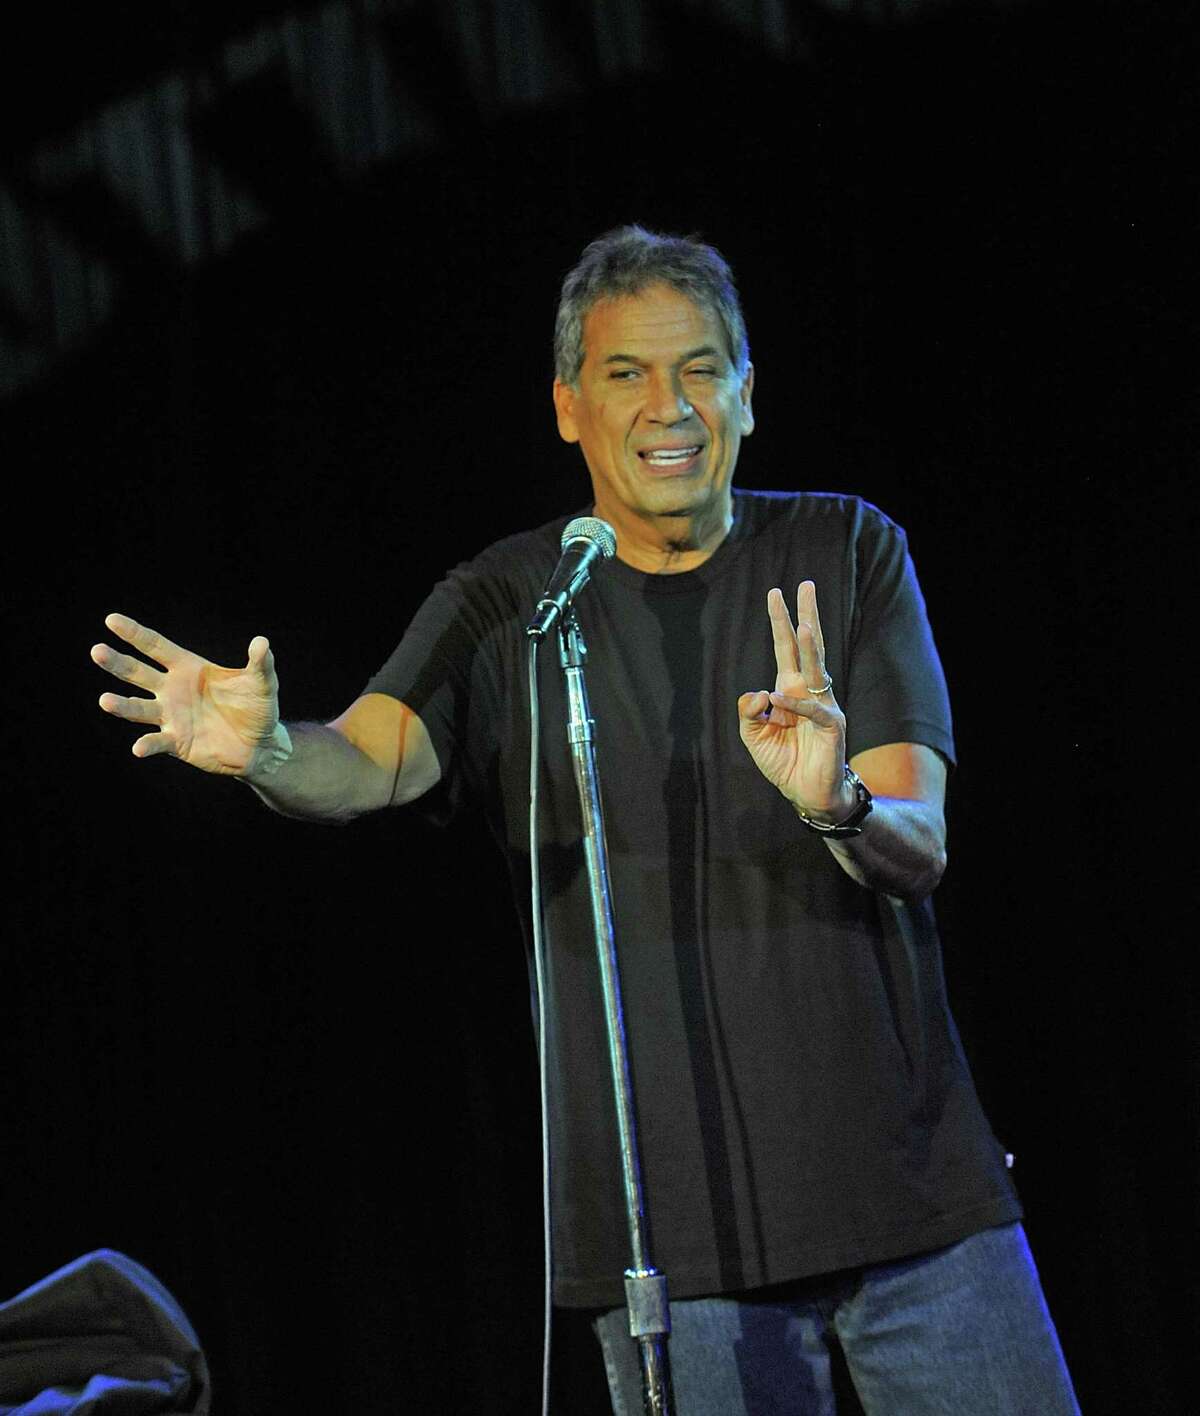 COLLINS AT MGM: Comic Bobby Collins, seen here in a 2018 gig, will headline three nights at the MGM Springfield’s Roar Comedy Series at the Armory building there Thursday, Feb. 6, at 8 p.m.; Friday, Feb. 7, at 8 p.m.; and Saturday, Feb. 8, at 7:15 p.m. and 9:45 p.m.